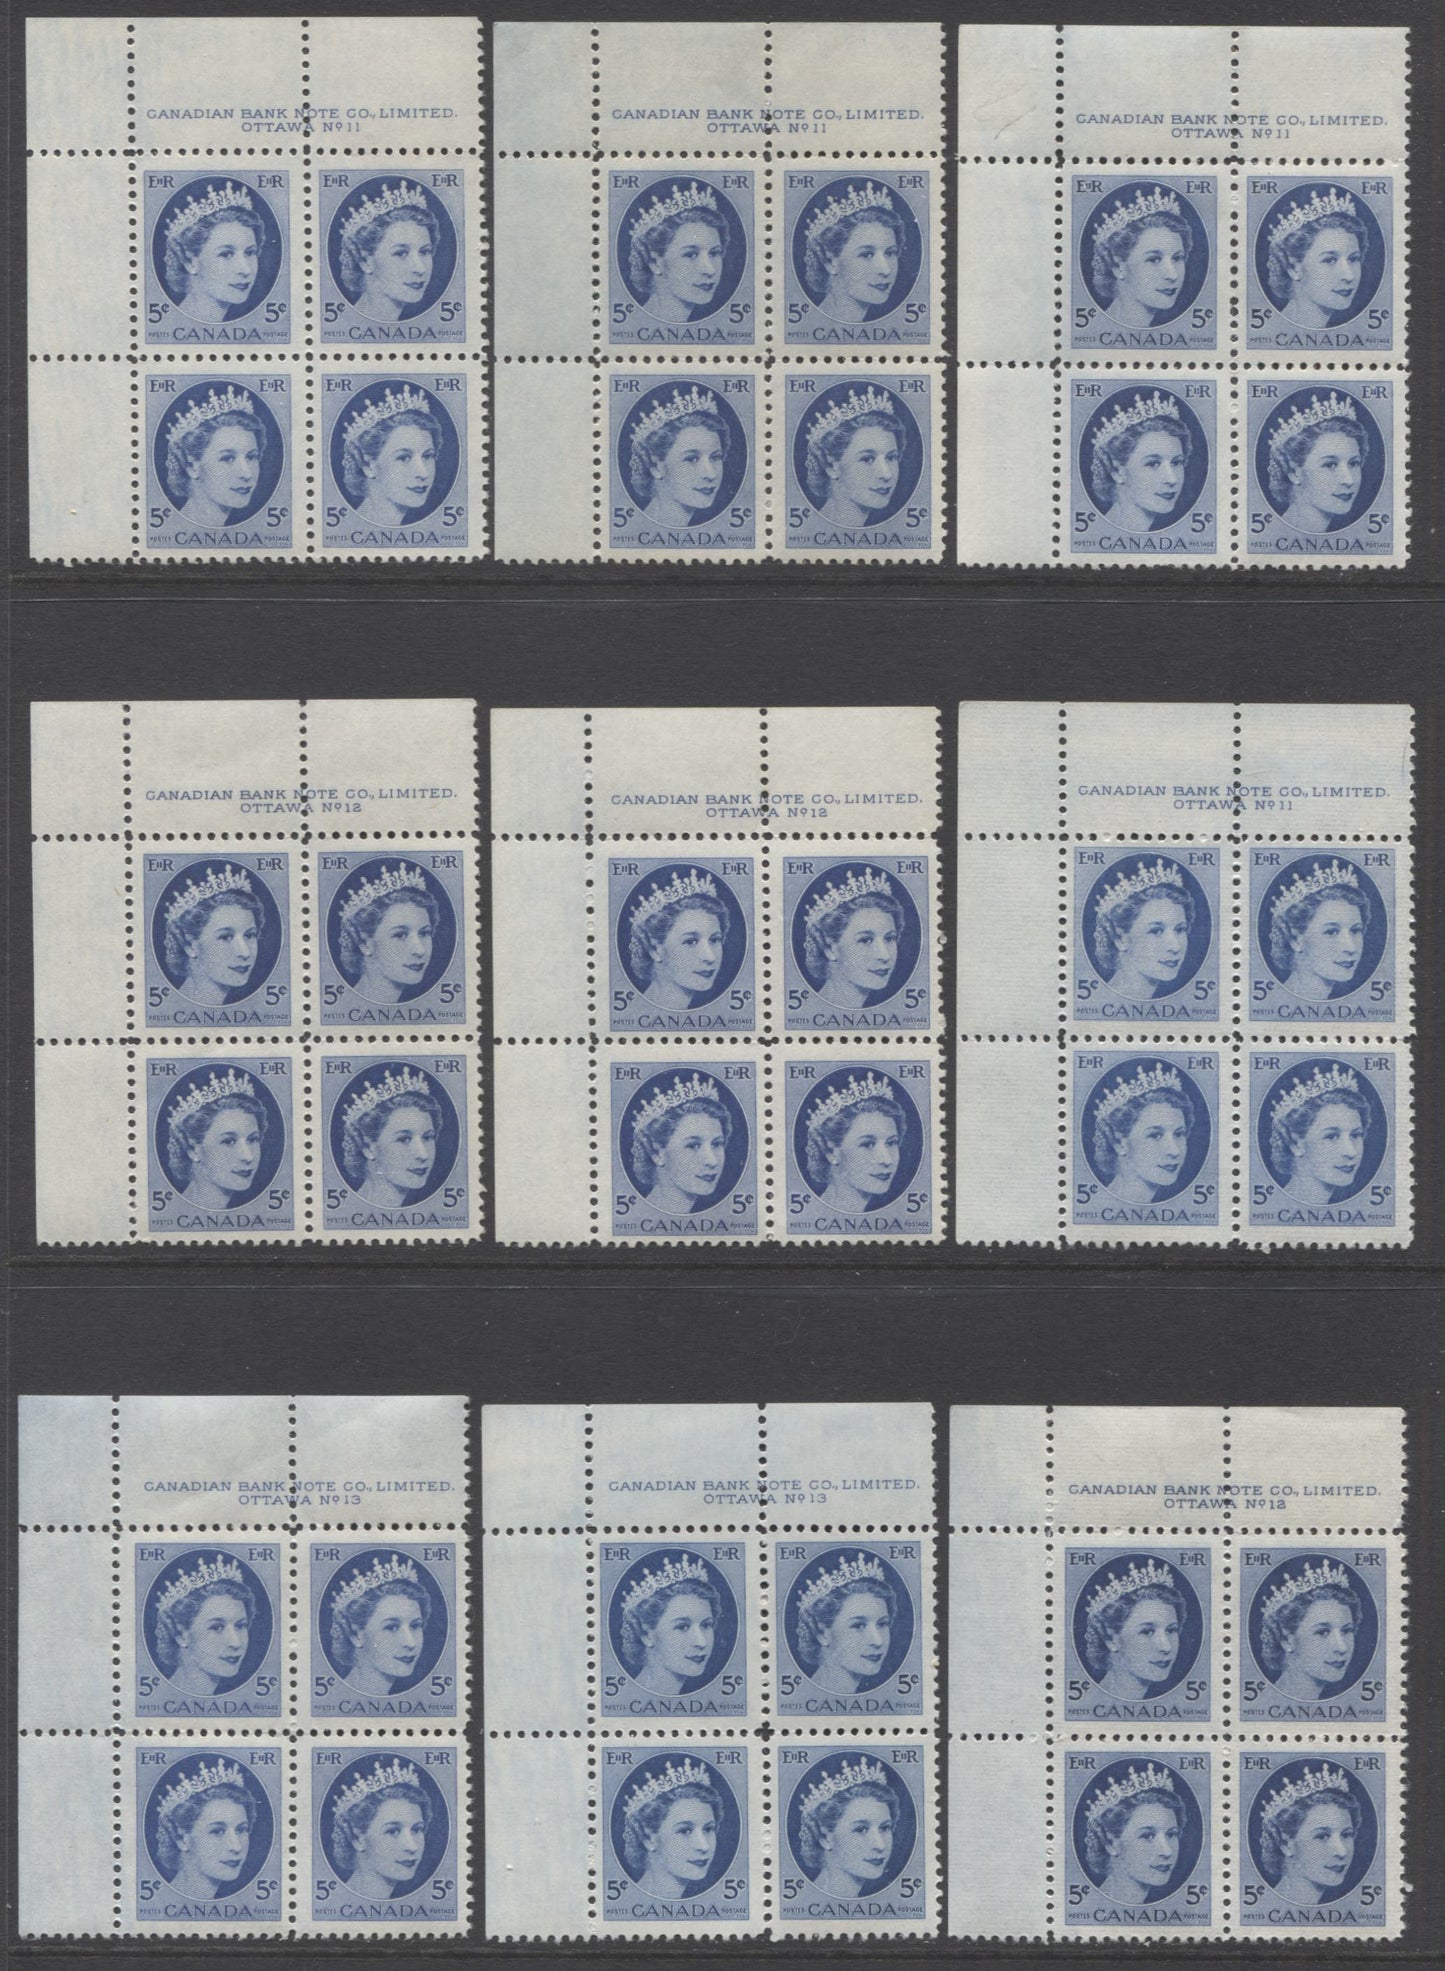 Lot 92 Canada #341 5c Bright Blue, 1954 Queen Elizabeth 2 - Wilding Portrait Issue, 17 F-VF NH UL Plates 8-13 Blocks Of 4 All DF Paper, With Various Ribbed & Smooth Papers And Shades